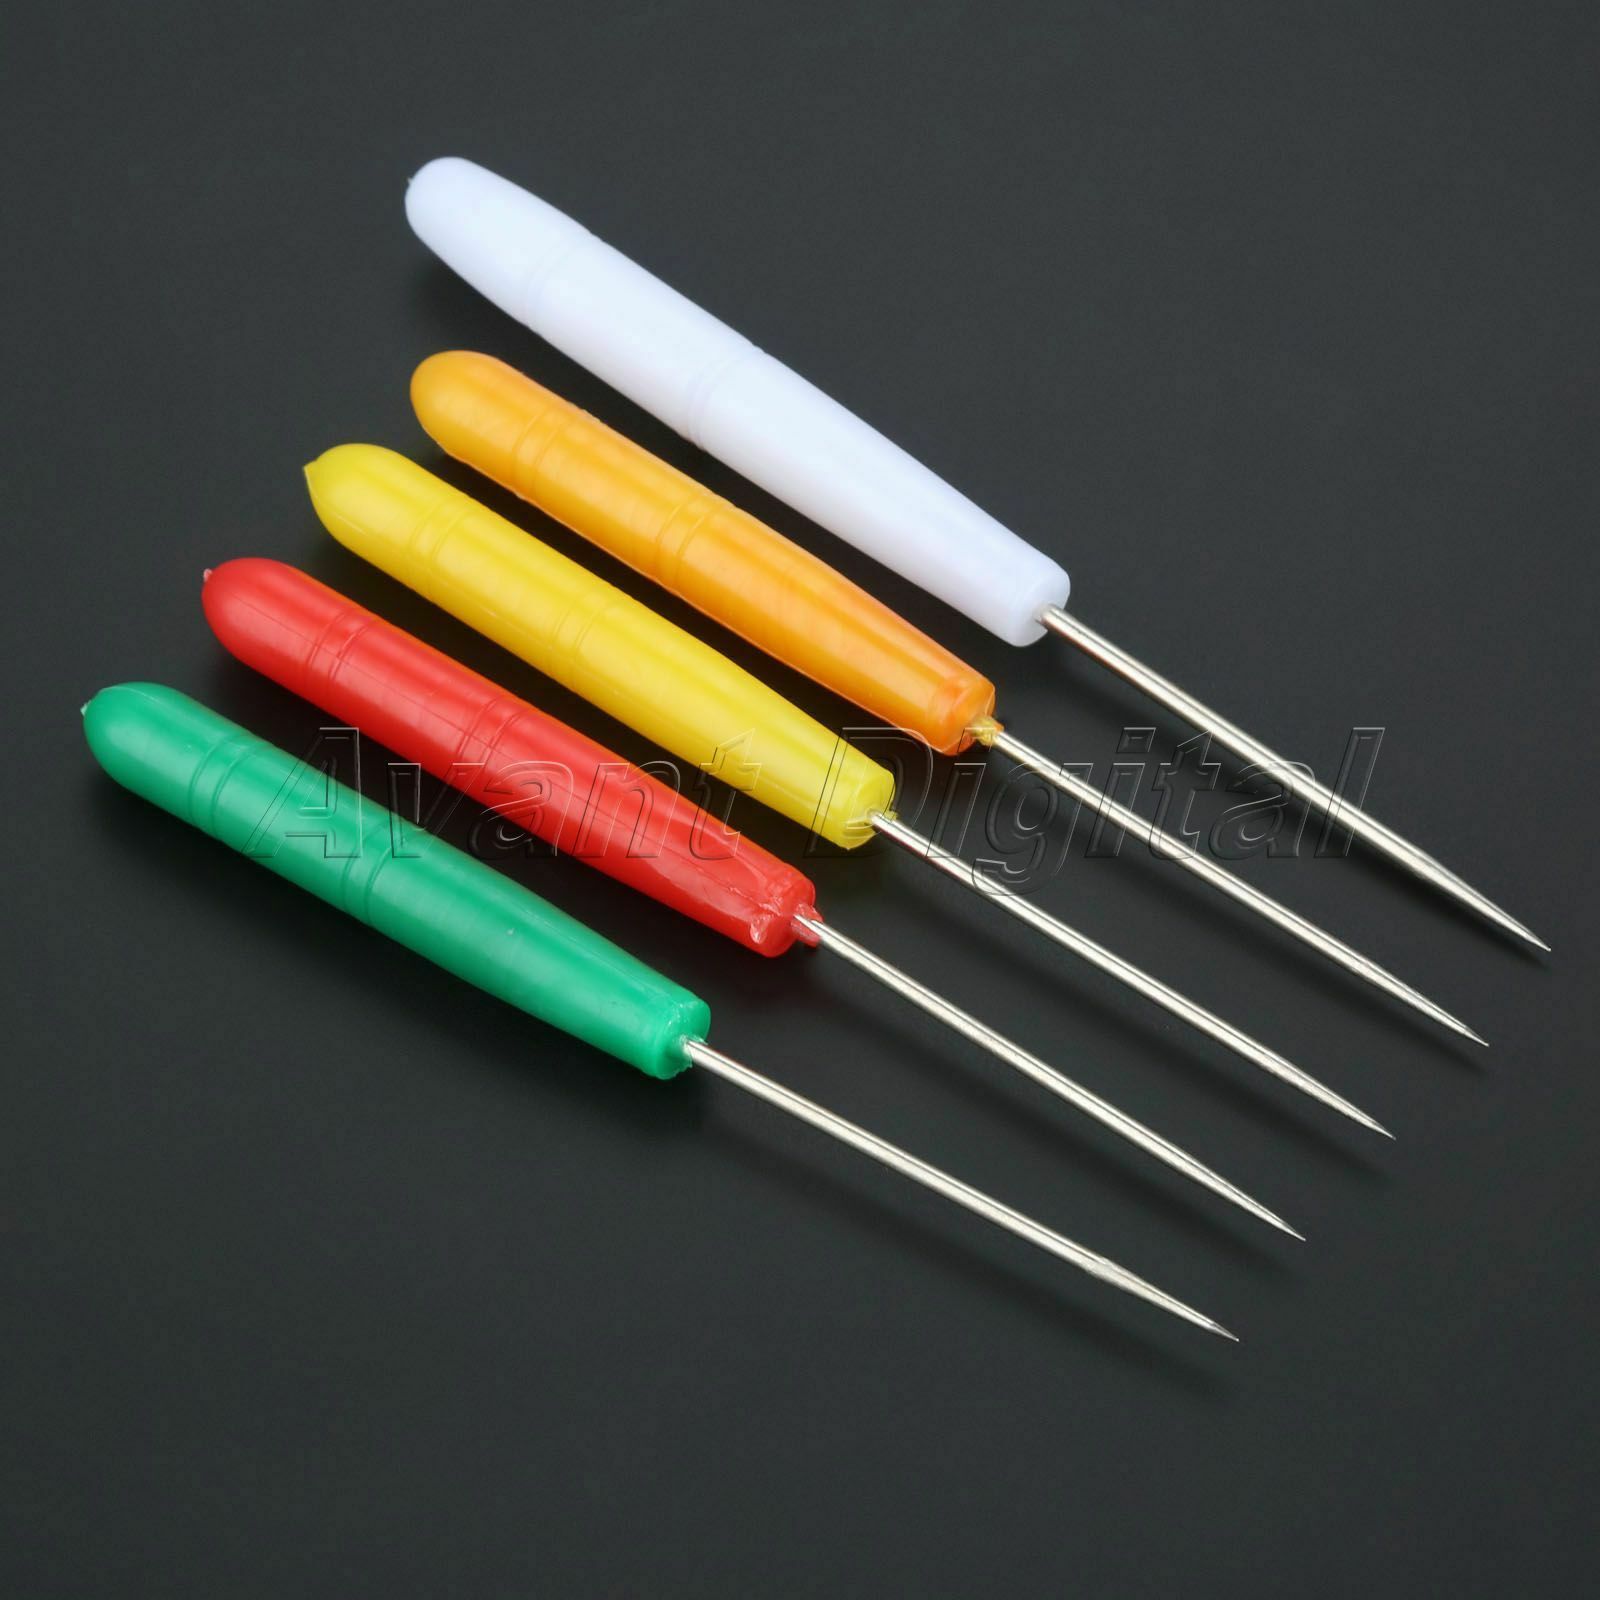 10pcs Sewing Awls Leather Punch Repair Stitching Clicker Tool Plastic Handle